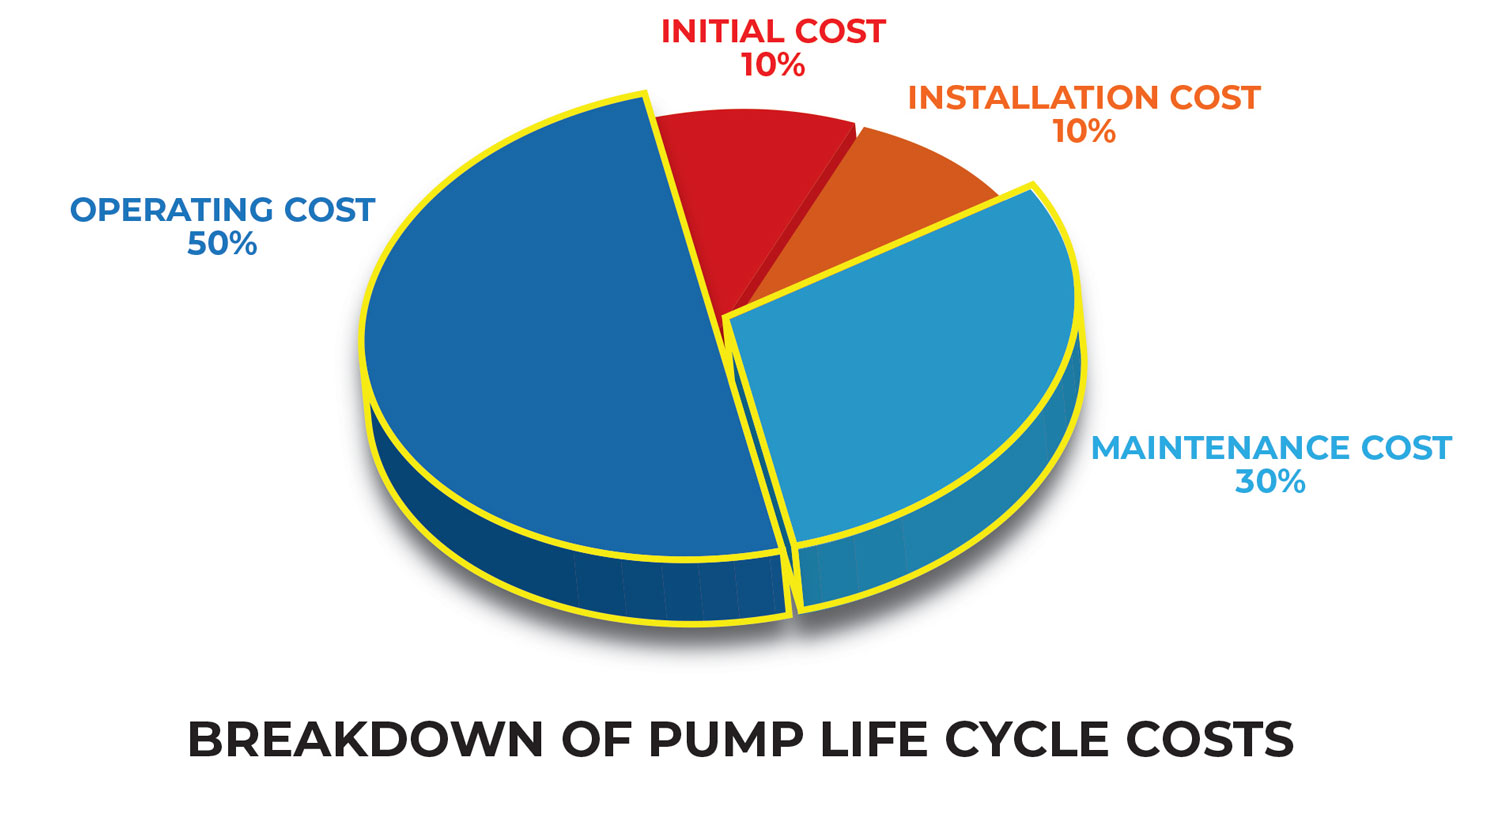 IMAGE 1: Breakdown of pump life cycle costs (Image courtesy of Sundyne)